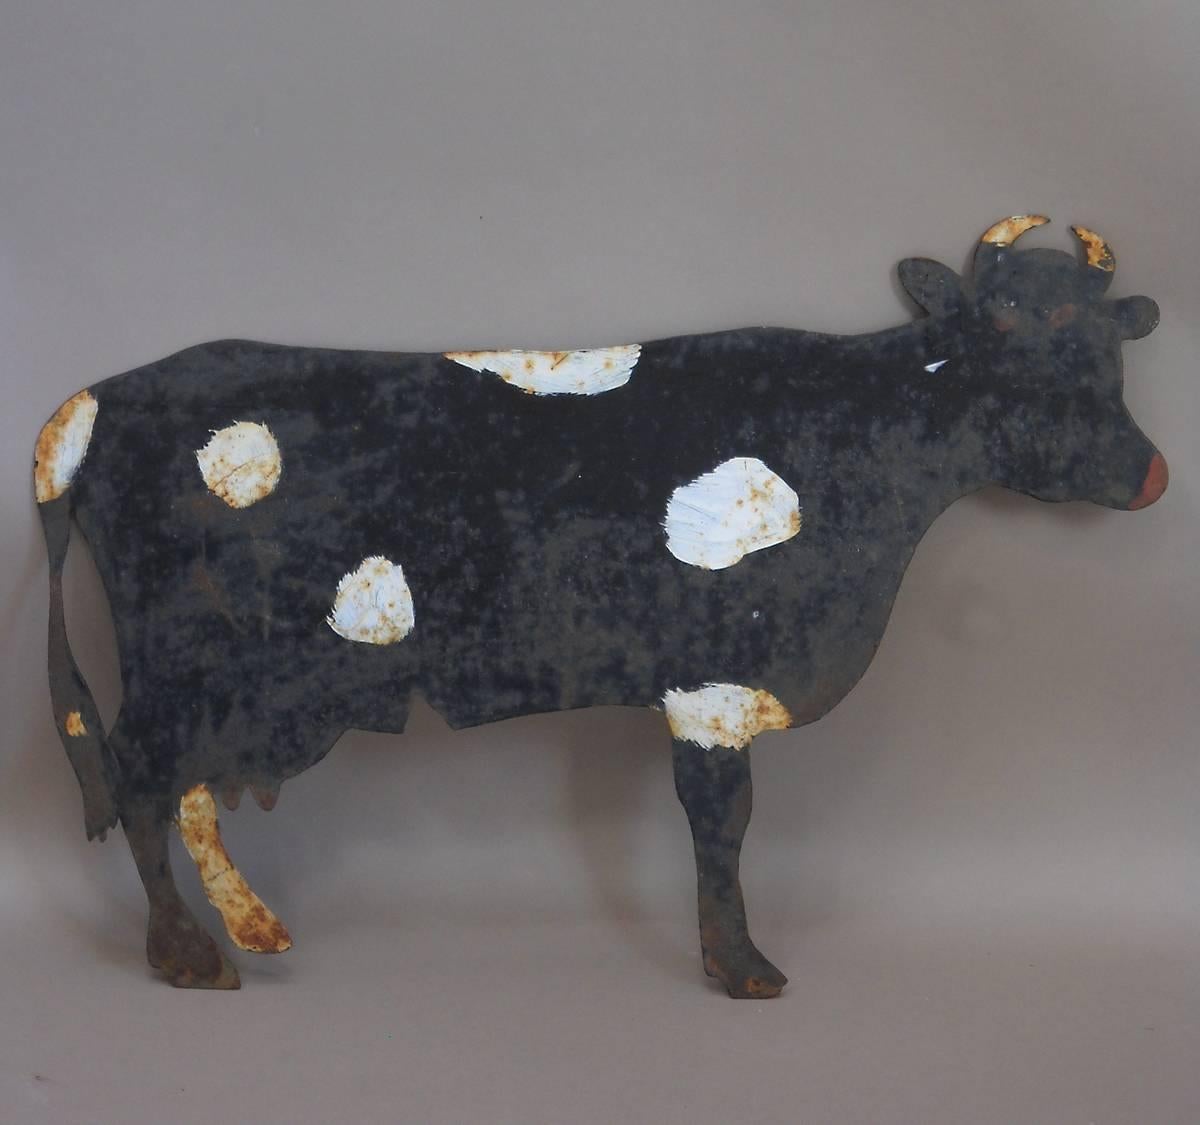 Painted cow Silhouette, Denmark, circa 1900, in sheet steel and mounted on an old wood block. The white spots and red nose and eyes are charmingly naïve.